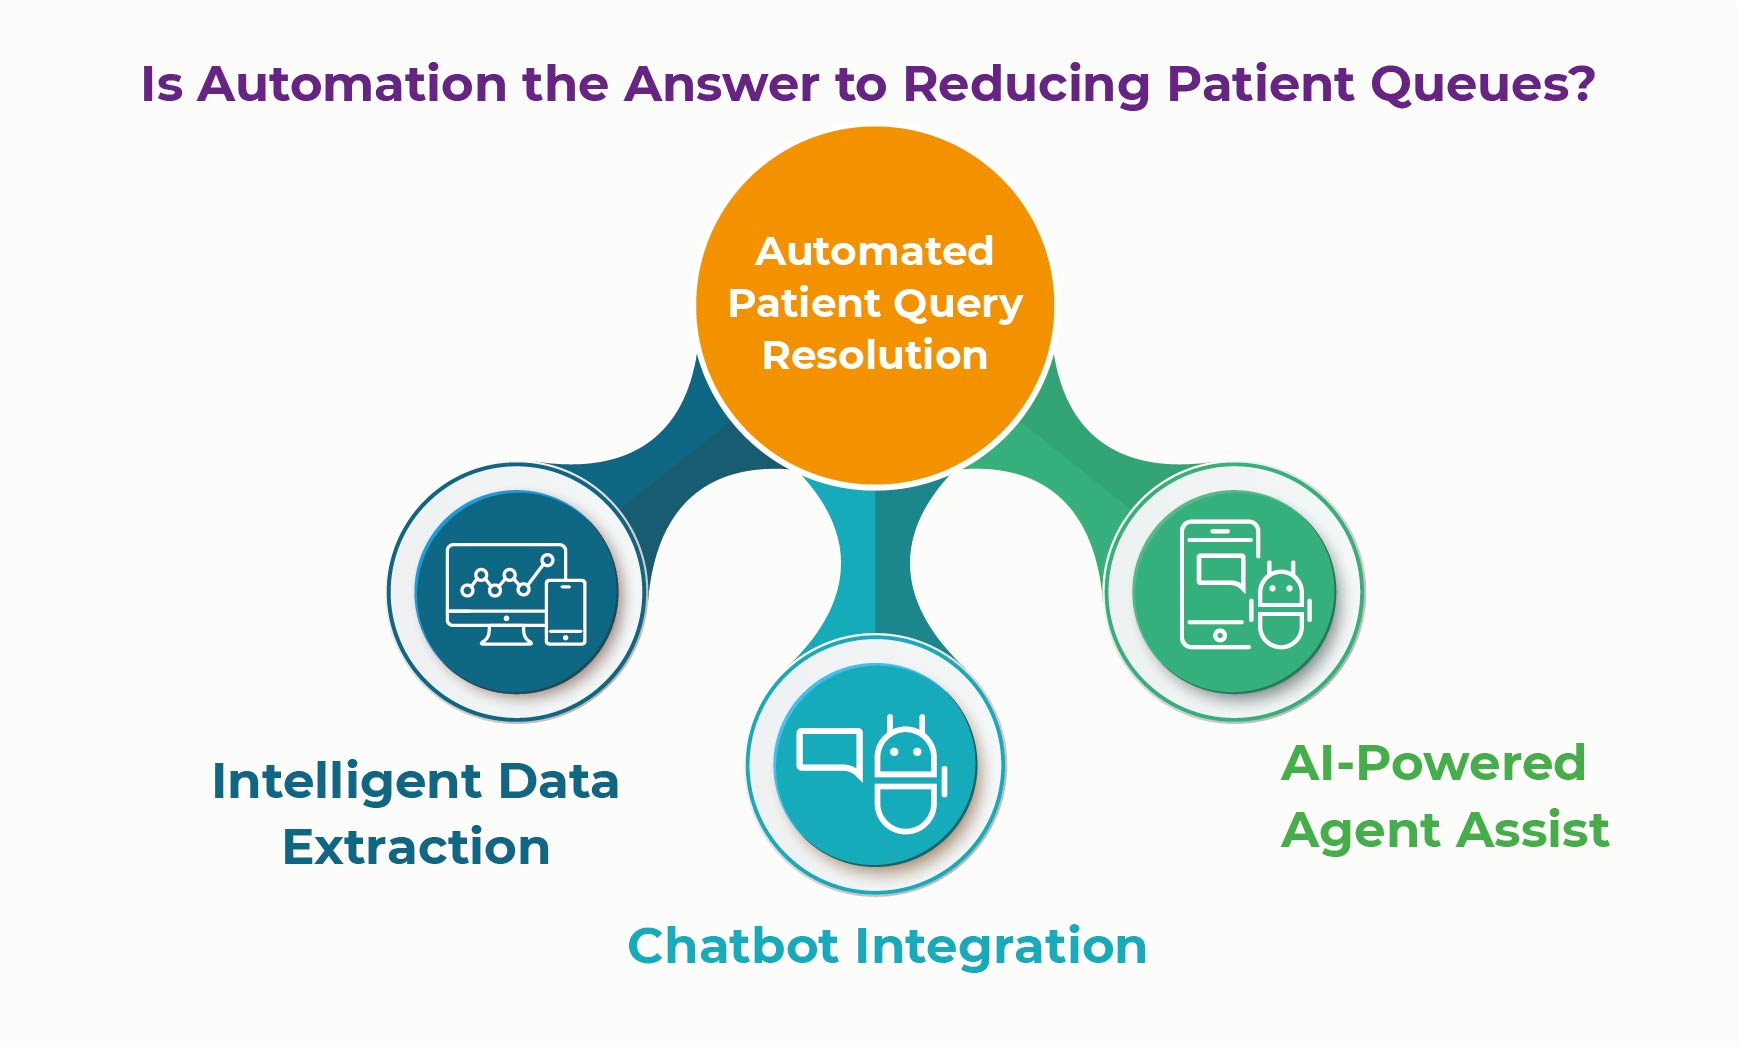 Is Automation the Answer to Reducing Patient Queues?